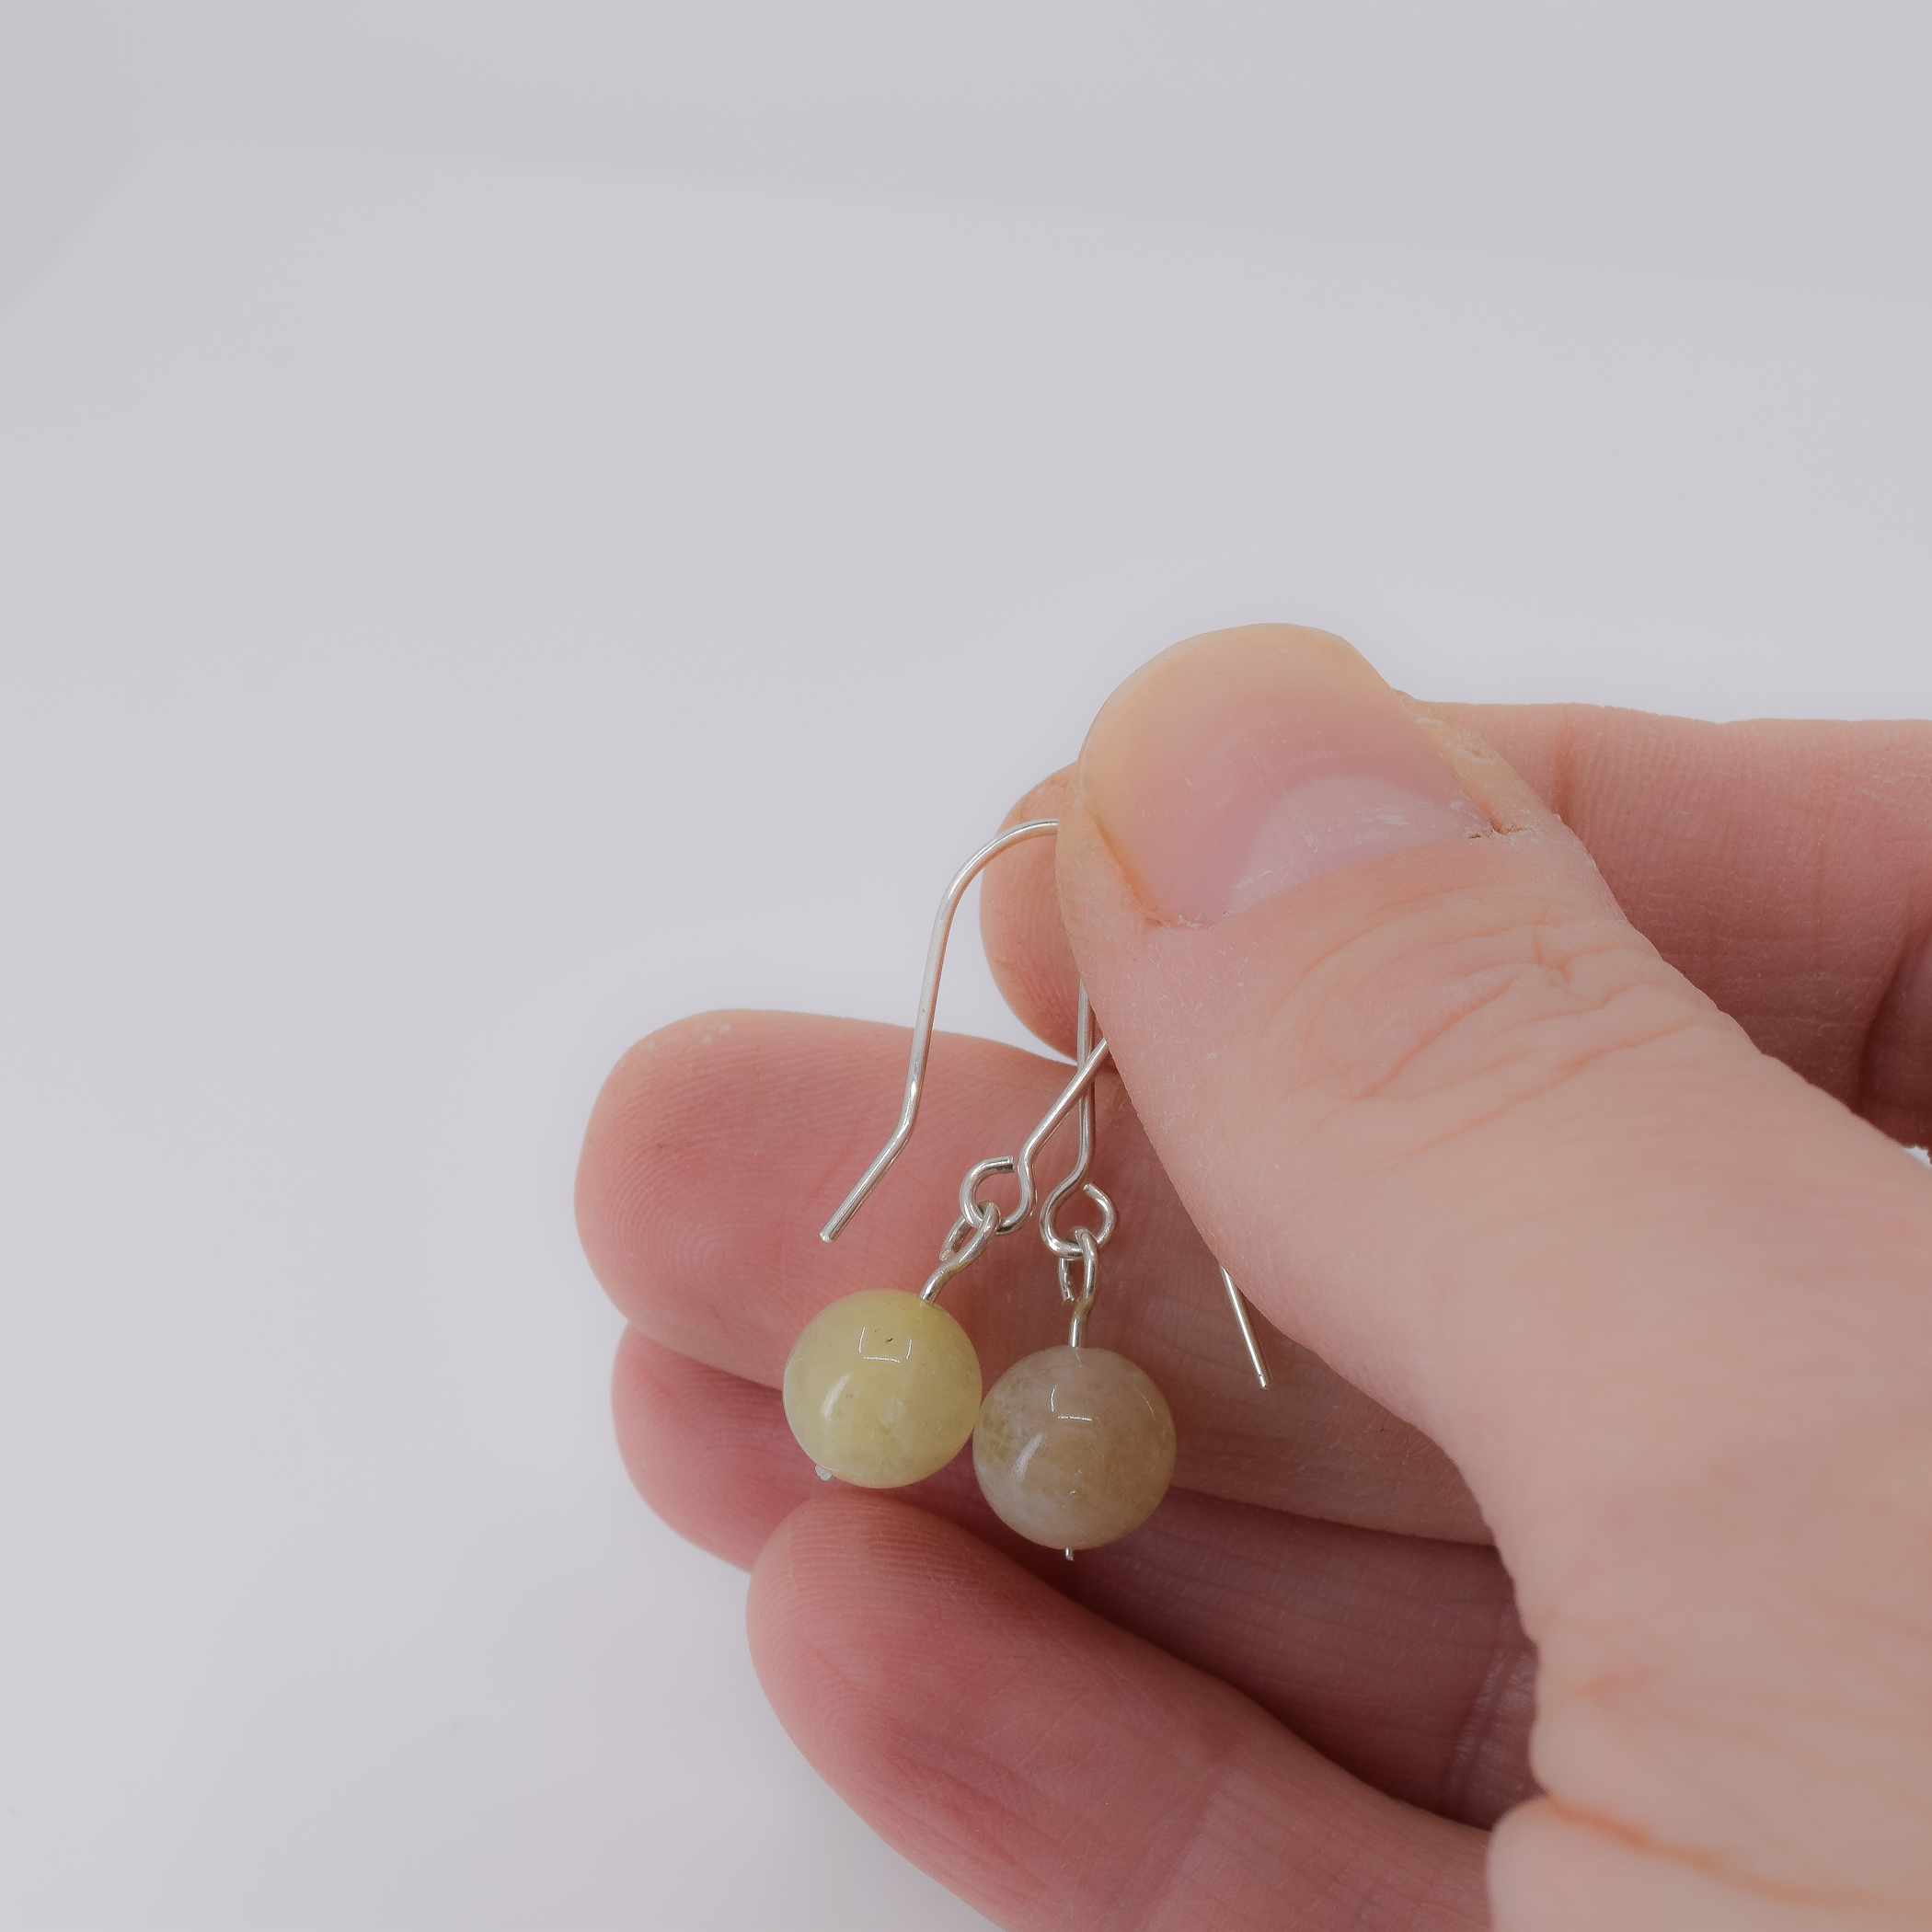 Short sterling silver dangle earrings featuring 8mm round morganite beads shown in hand for scale